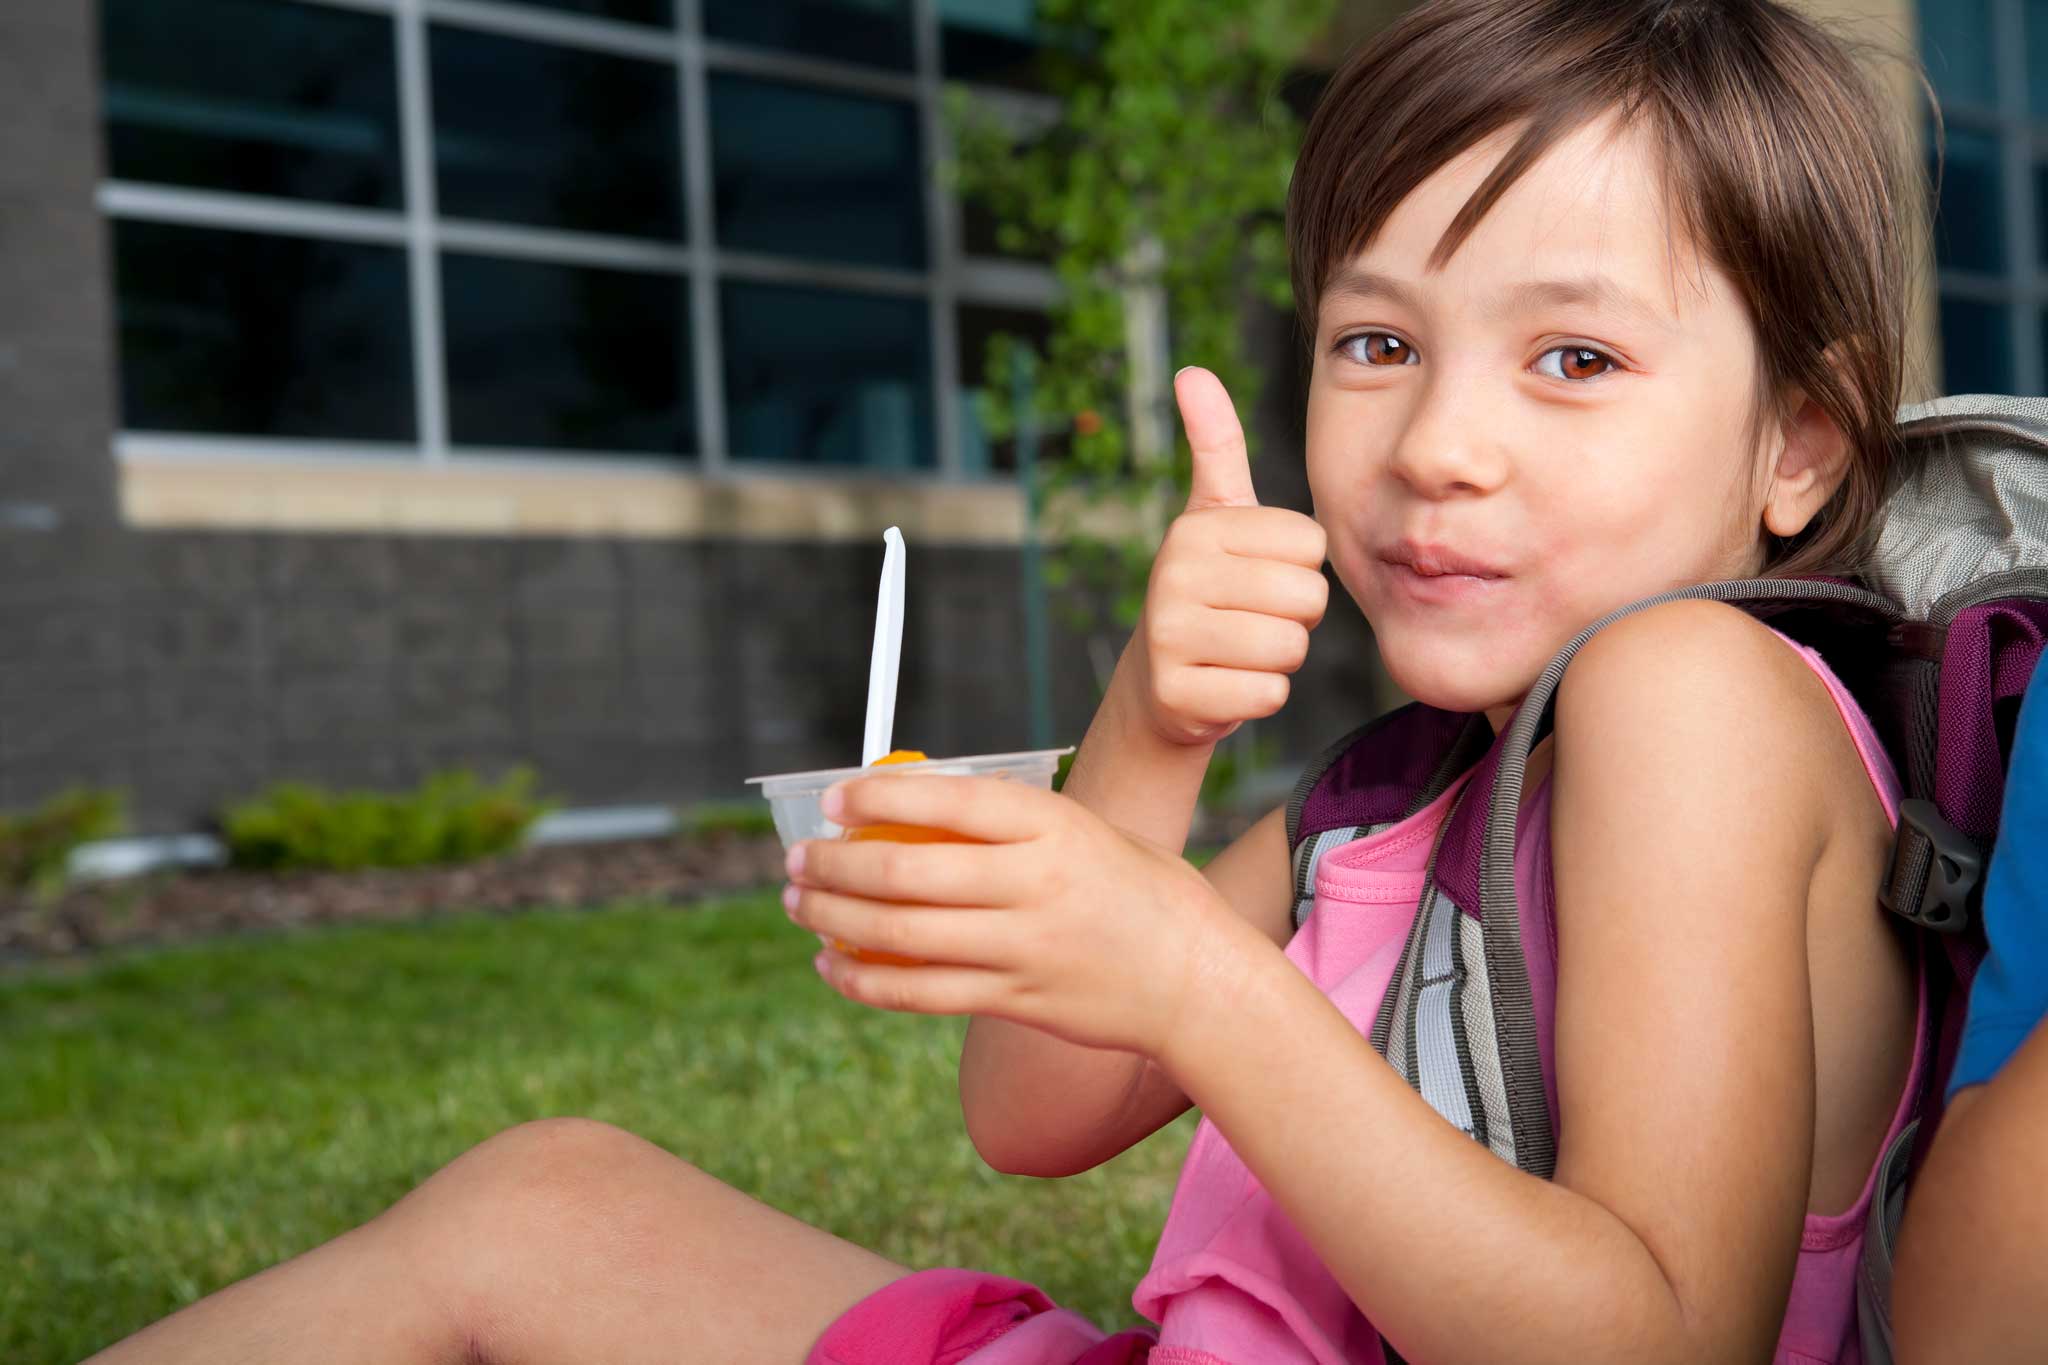 A young child eating peaches gives a thumbs up to the camera.